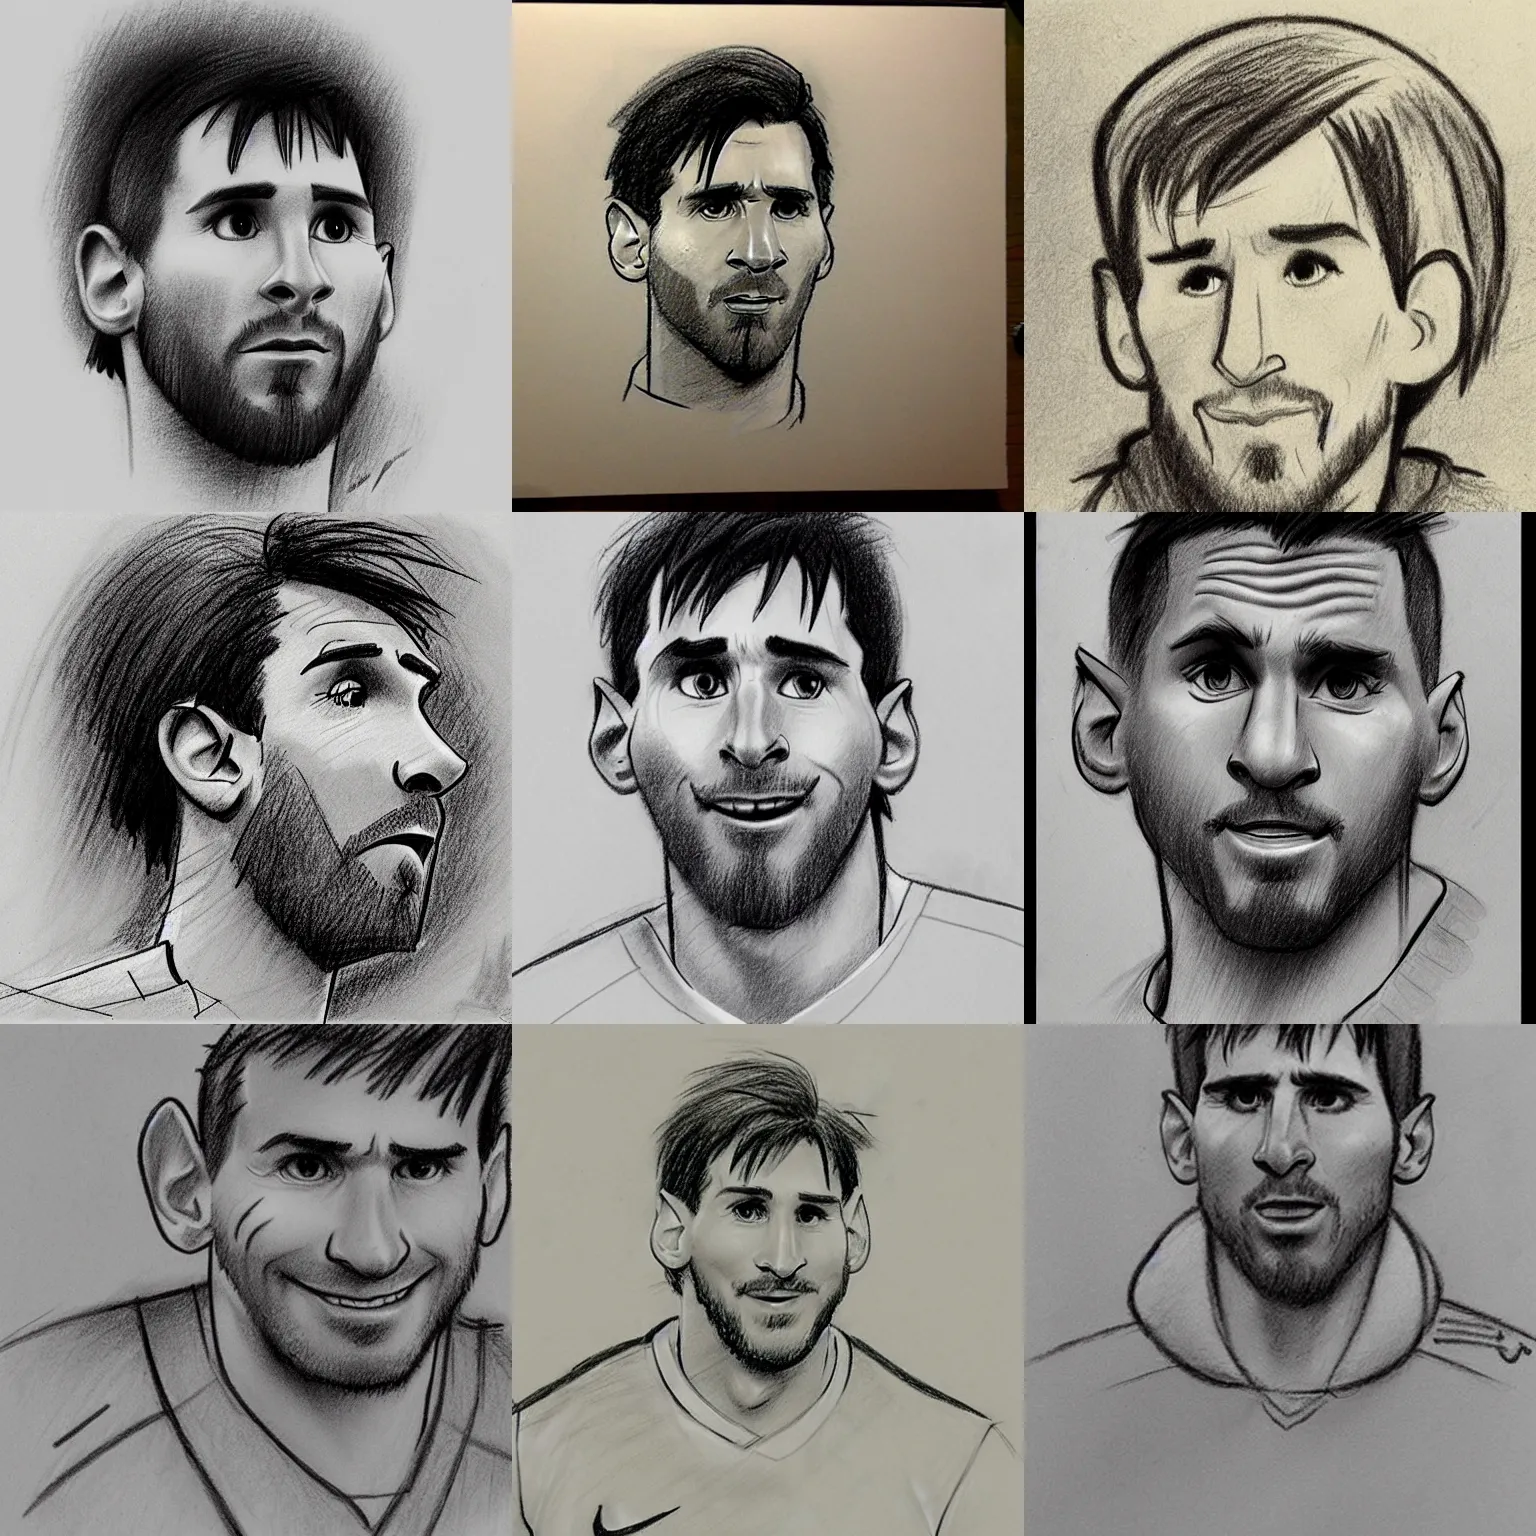 How To Draw Messi (Celebration) | Step By Step | Football/Soccer - YouTube